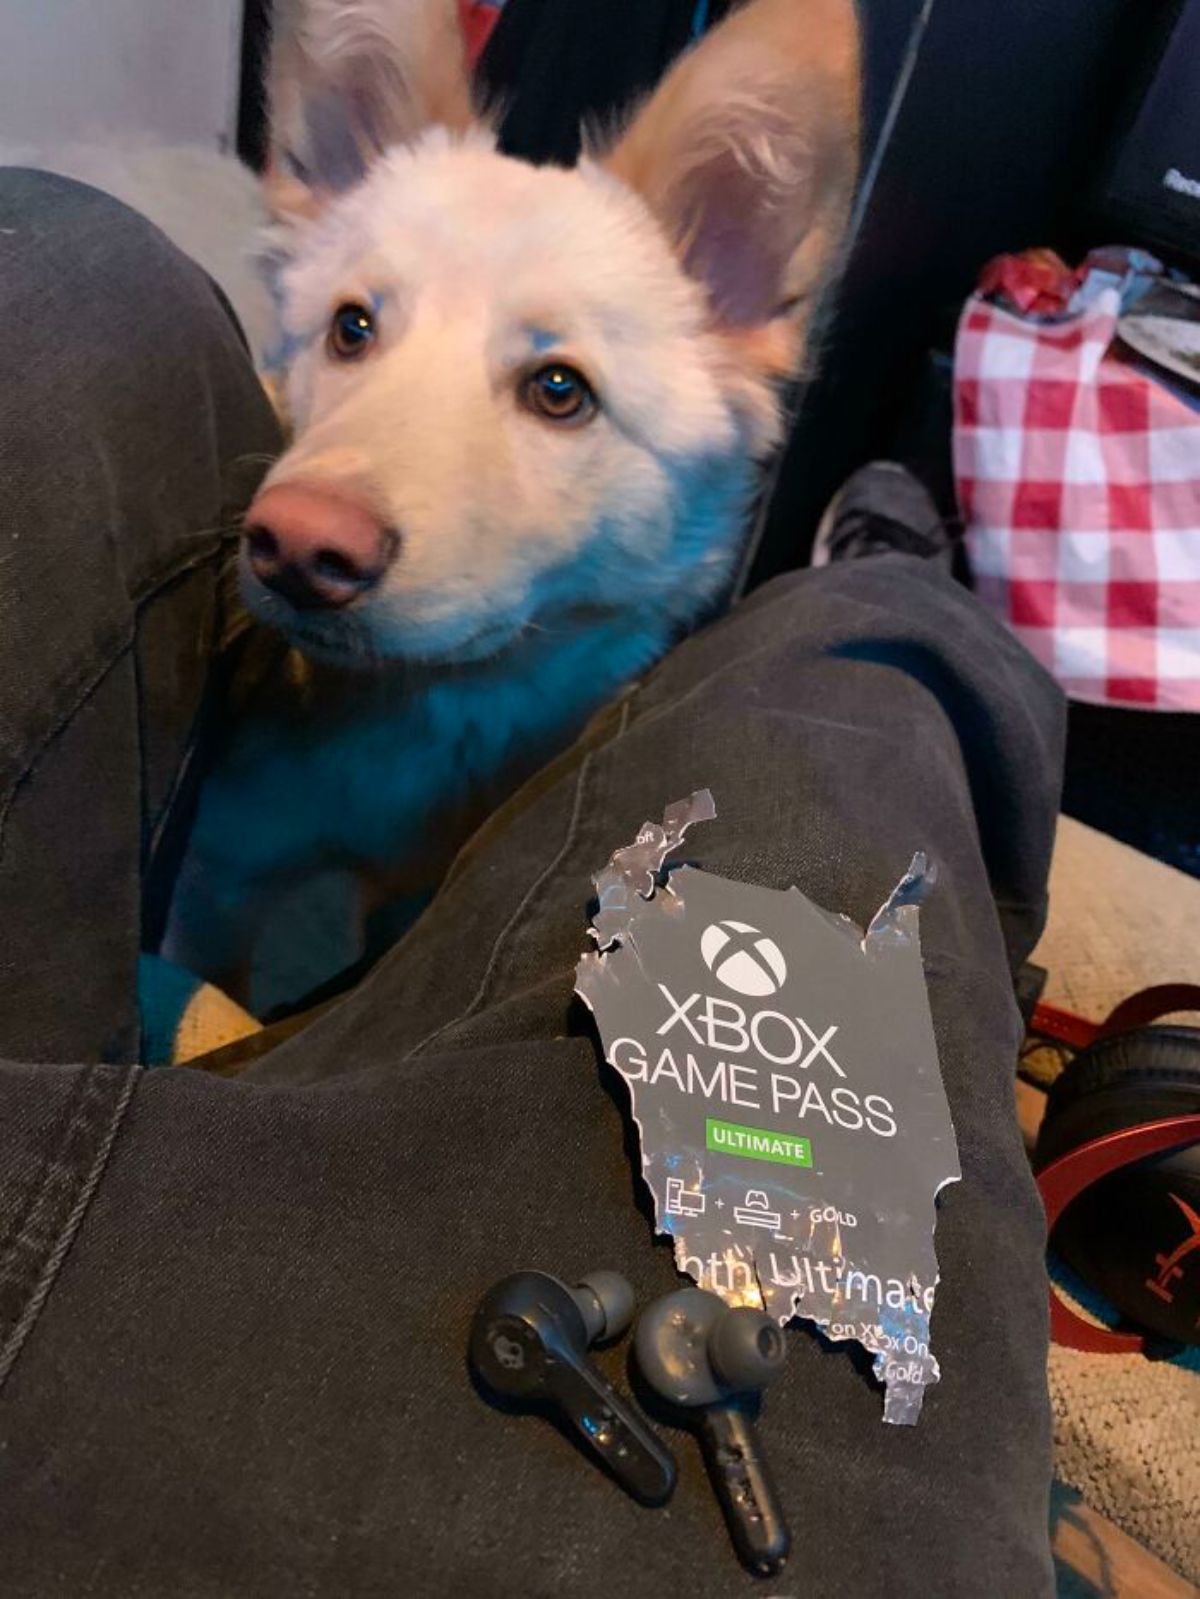 fluffy white dog standing next to a ripped up xbox game pass paper and chewed up ear phones